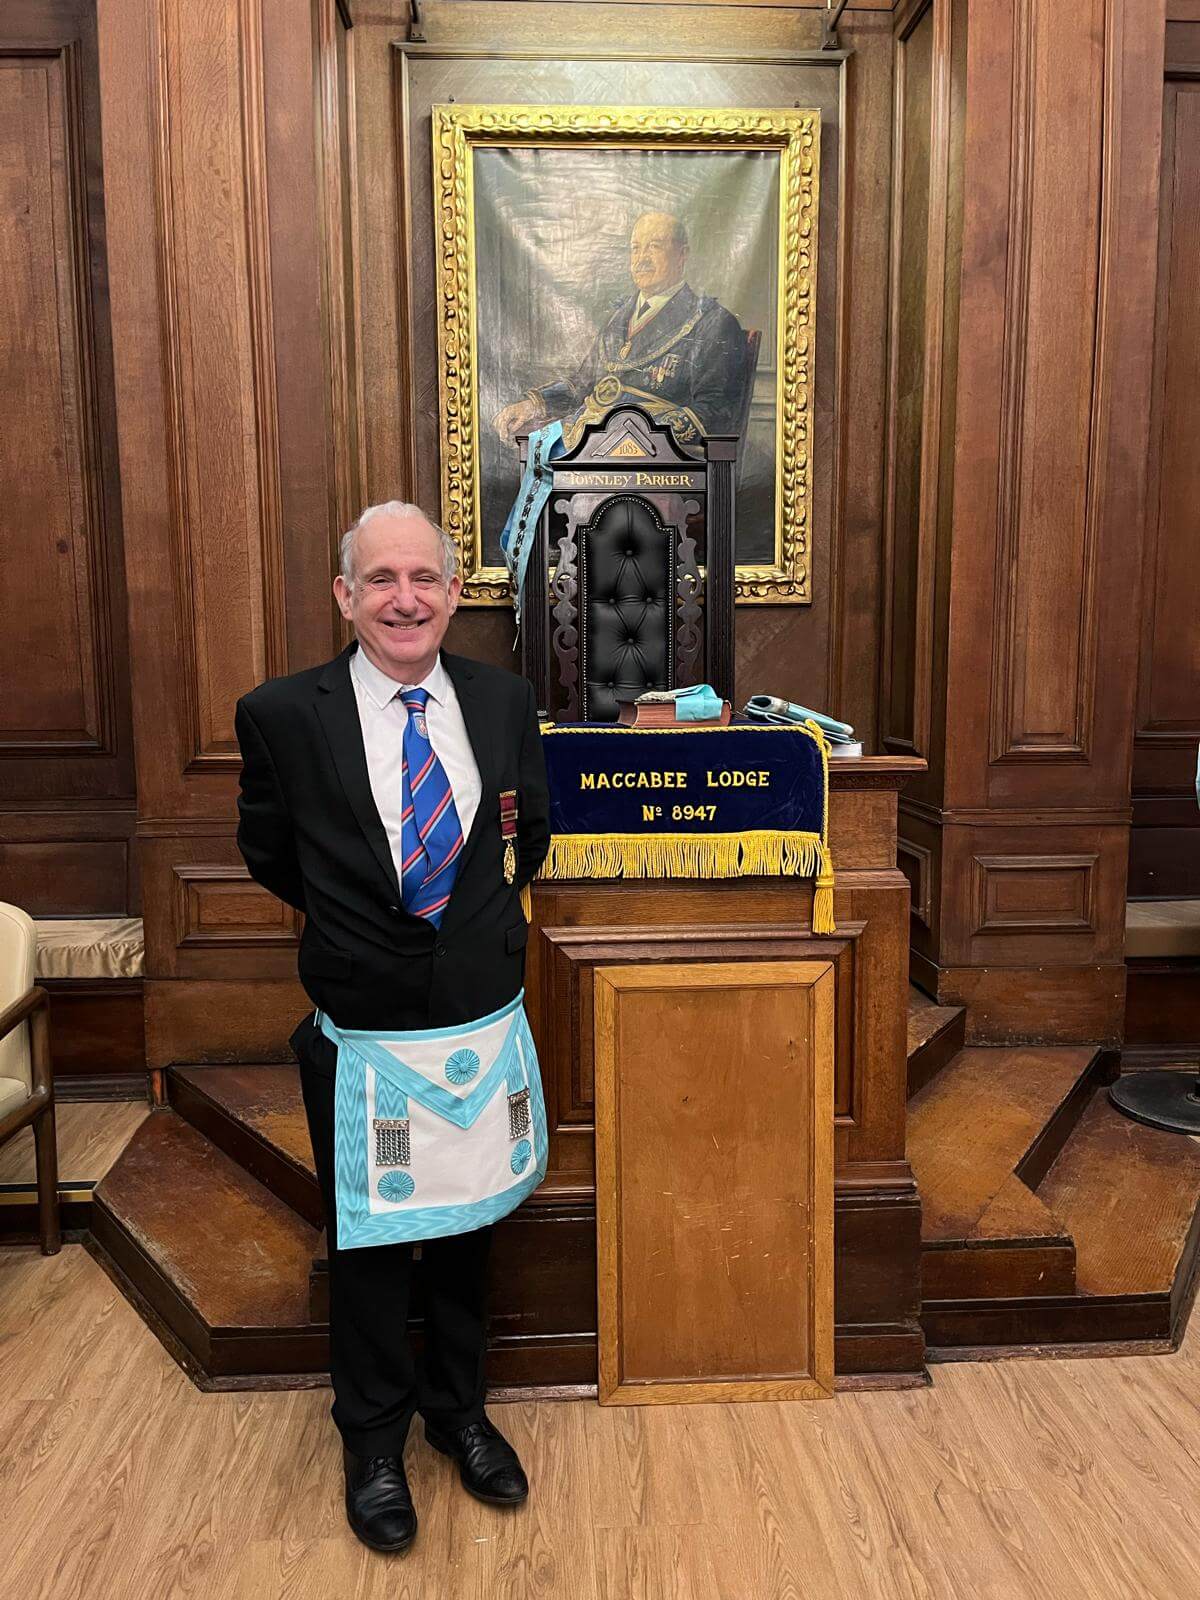 Maccabee Lodge Installation see a new Master for the first time in years